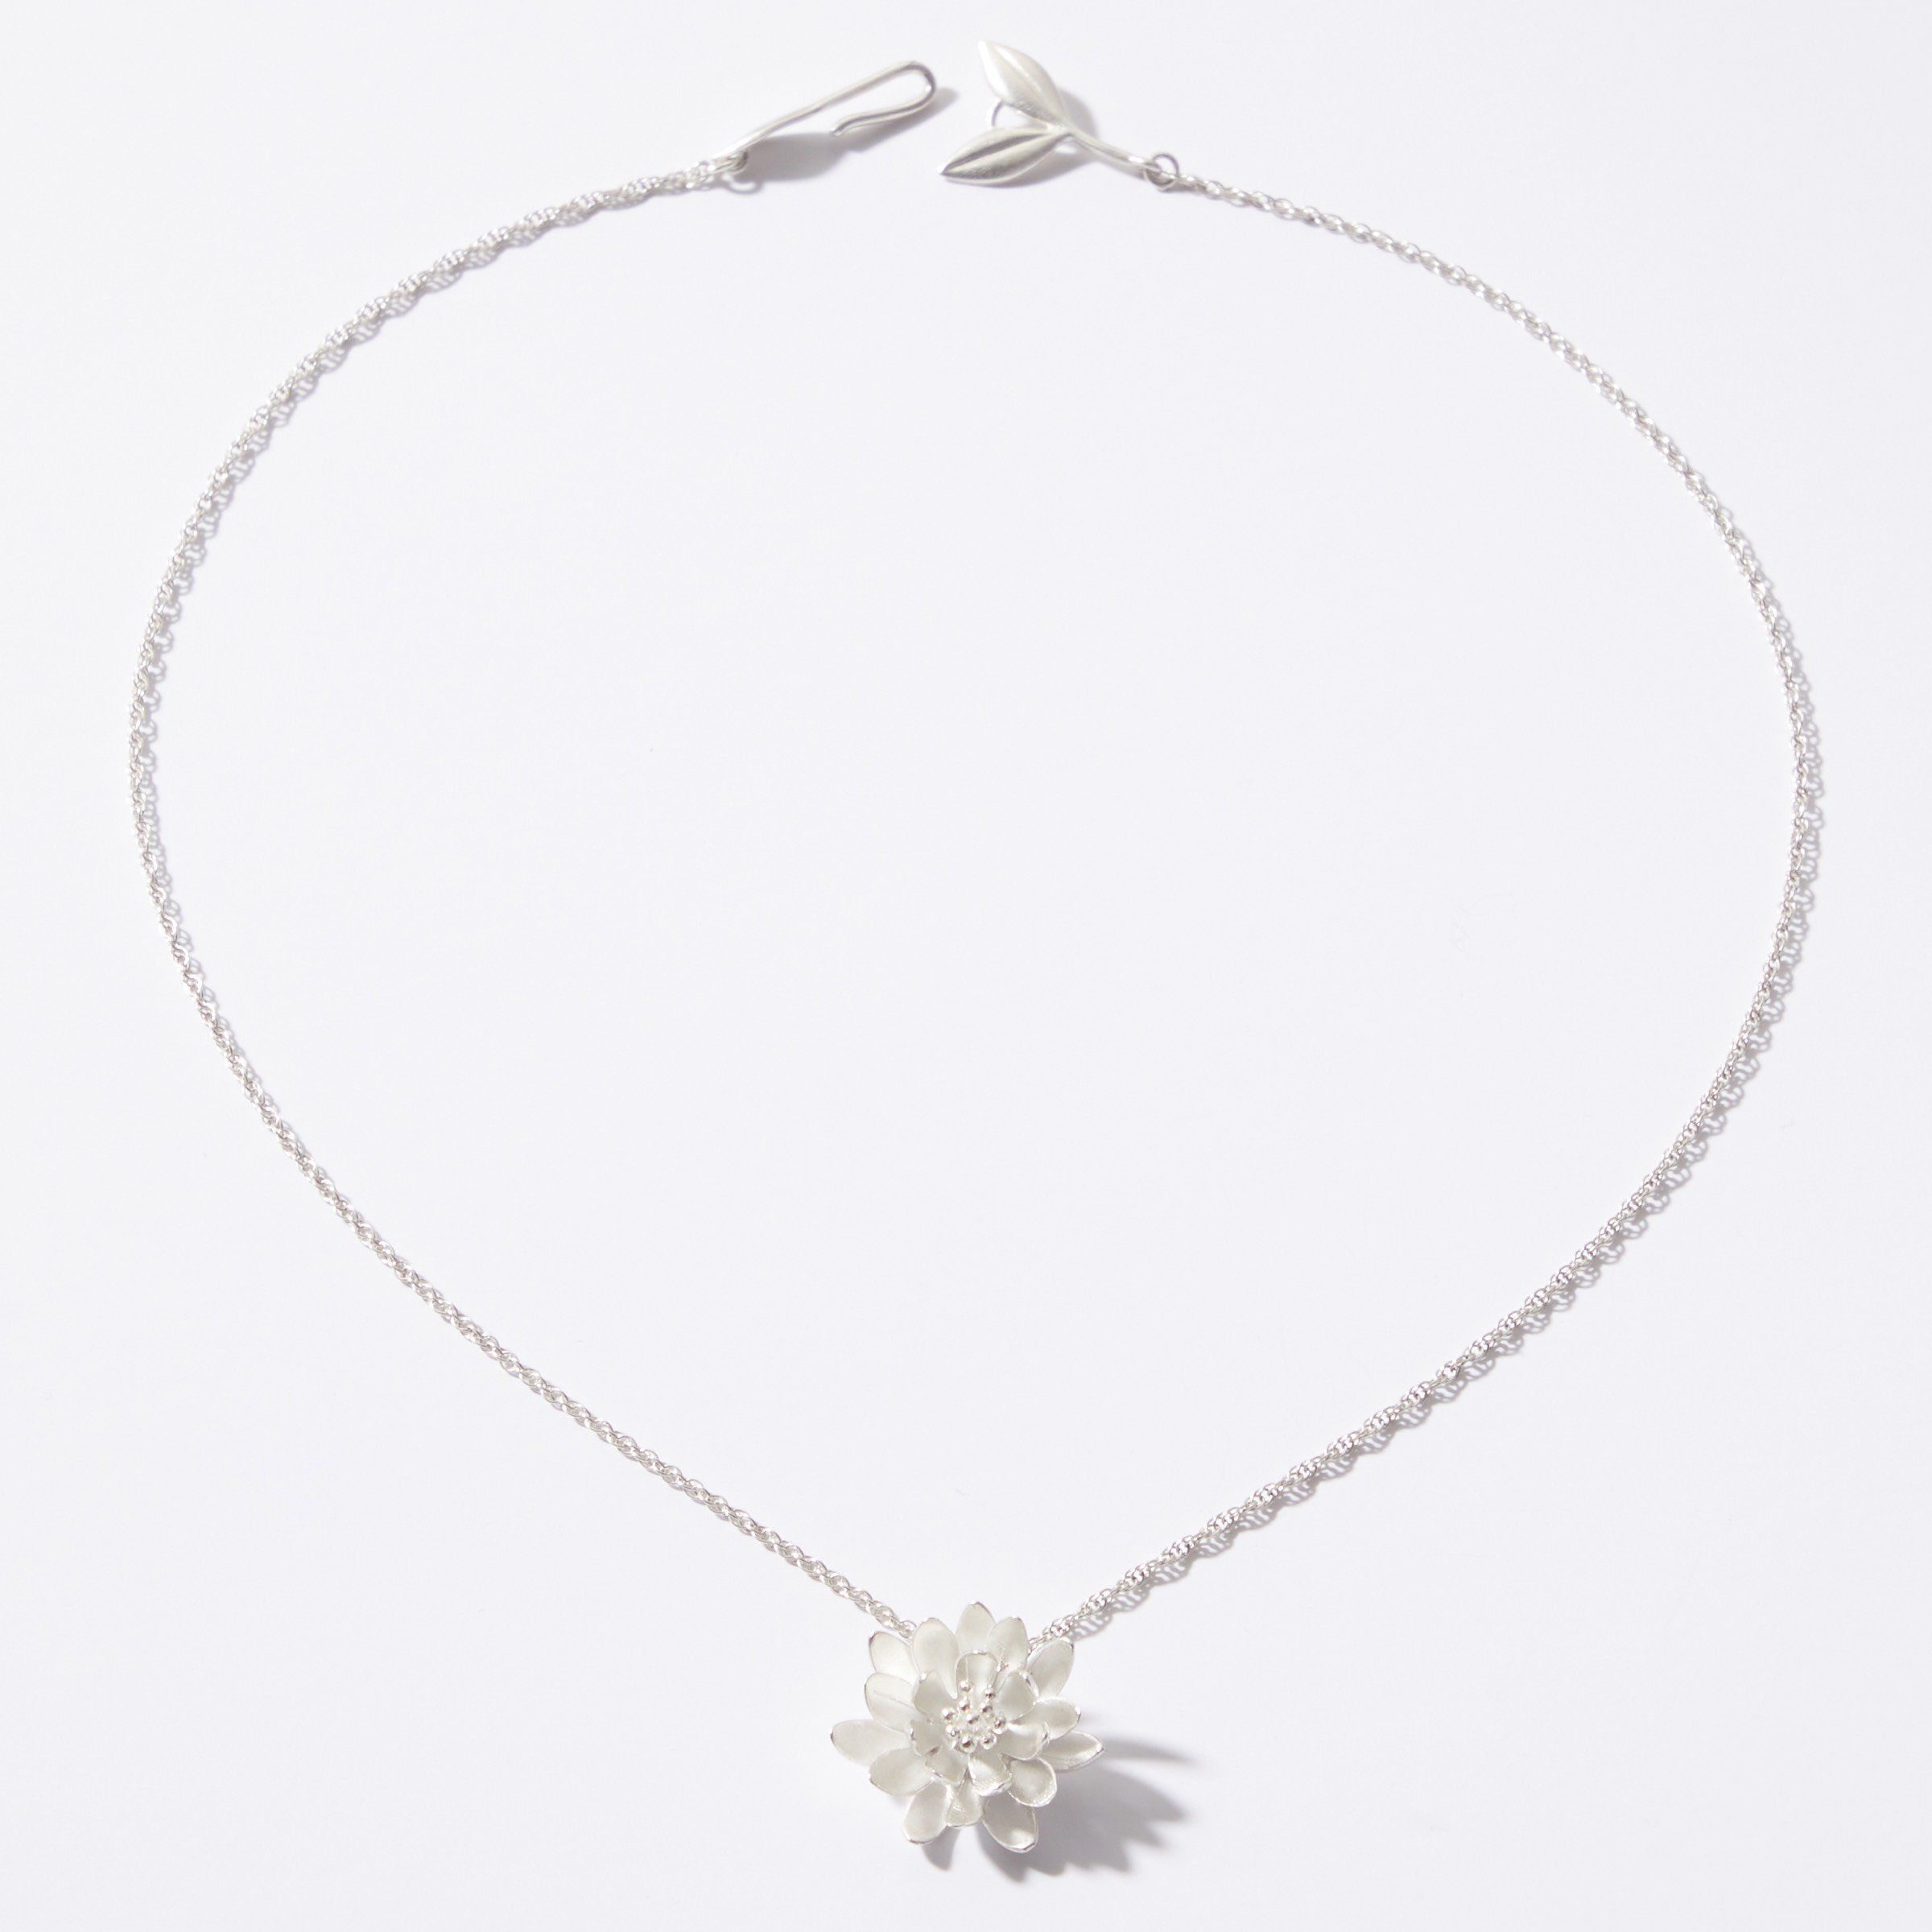 Silver Waterlily Pendant by Elise Moran (Silver Necklace) | Artful Home